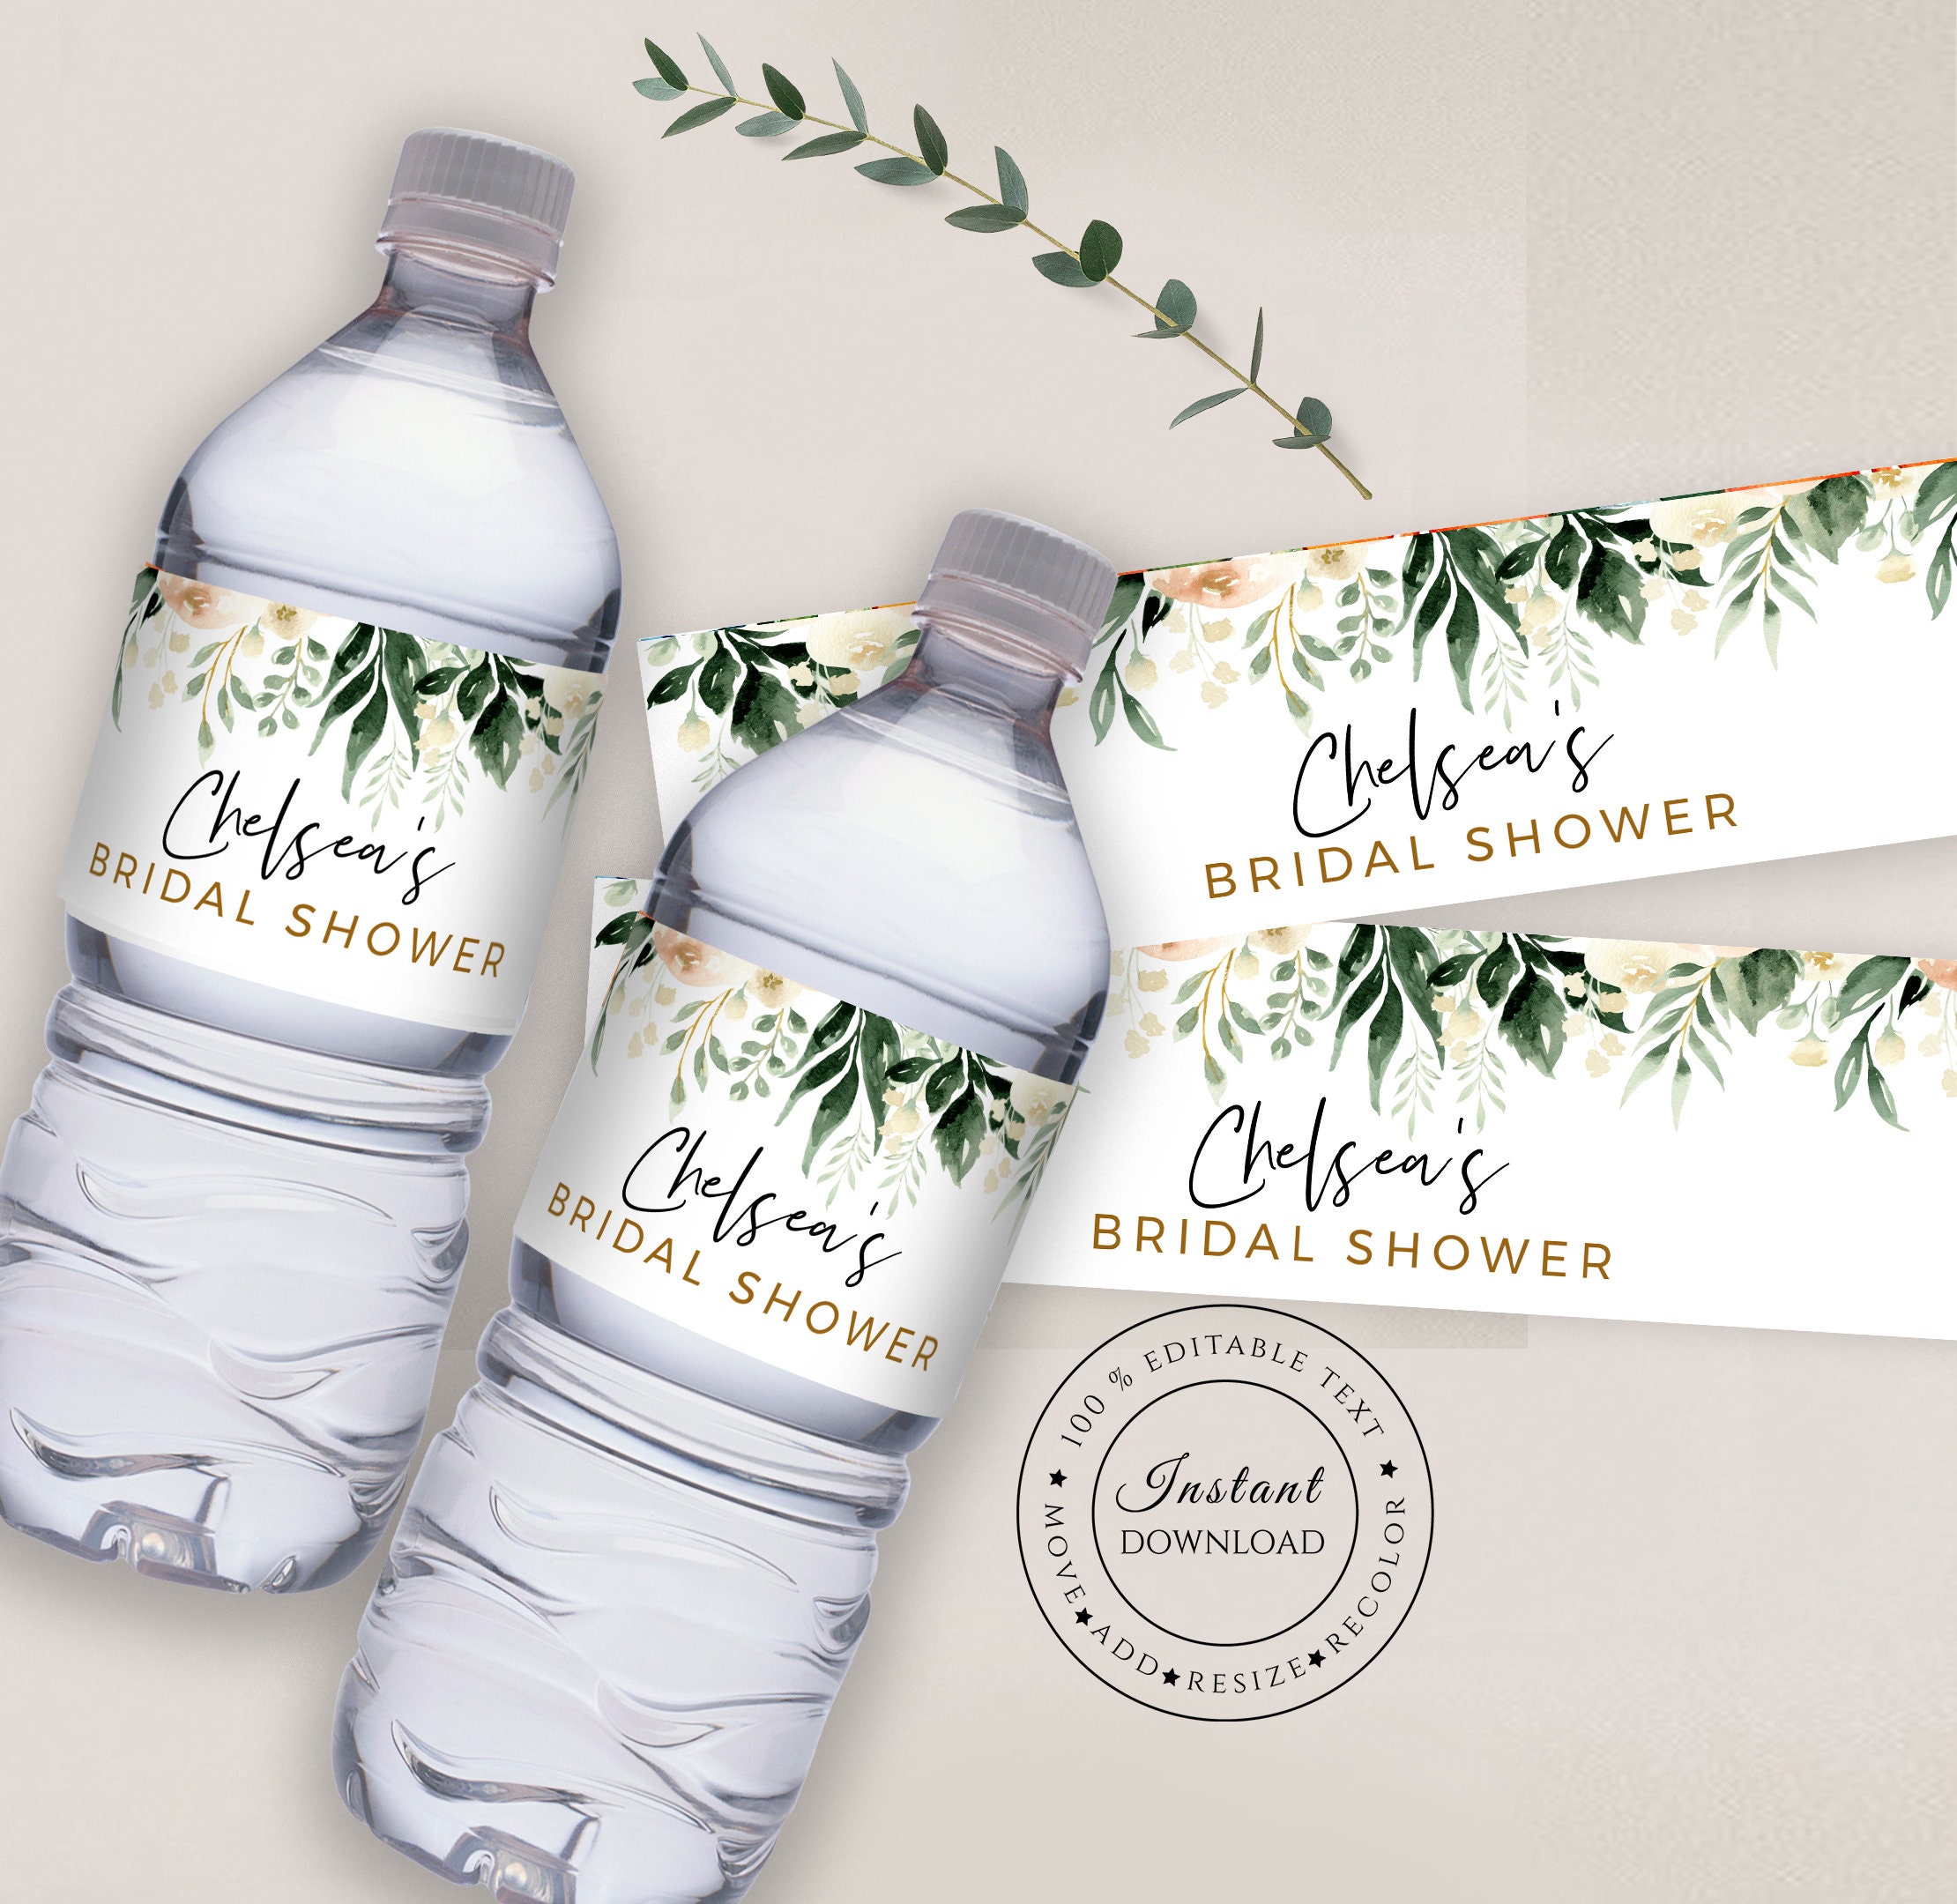 Printed Personalized Water Bottle Labels / Bird in Blush and Navy Flowers / BD22 Bridal Showers Wedding Favors and more Baby Showers